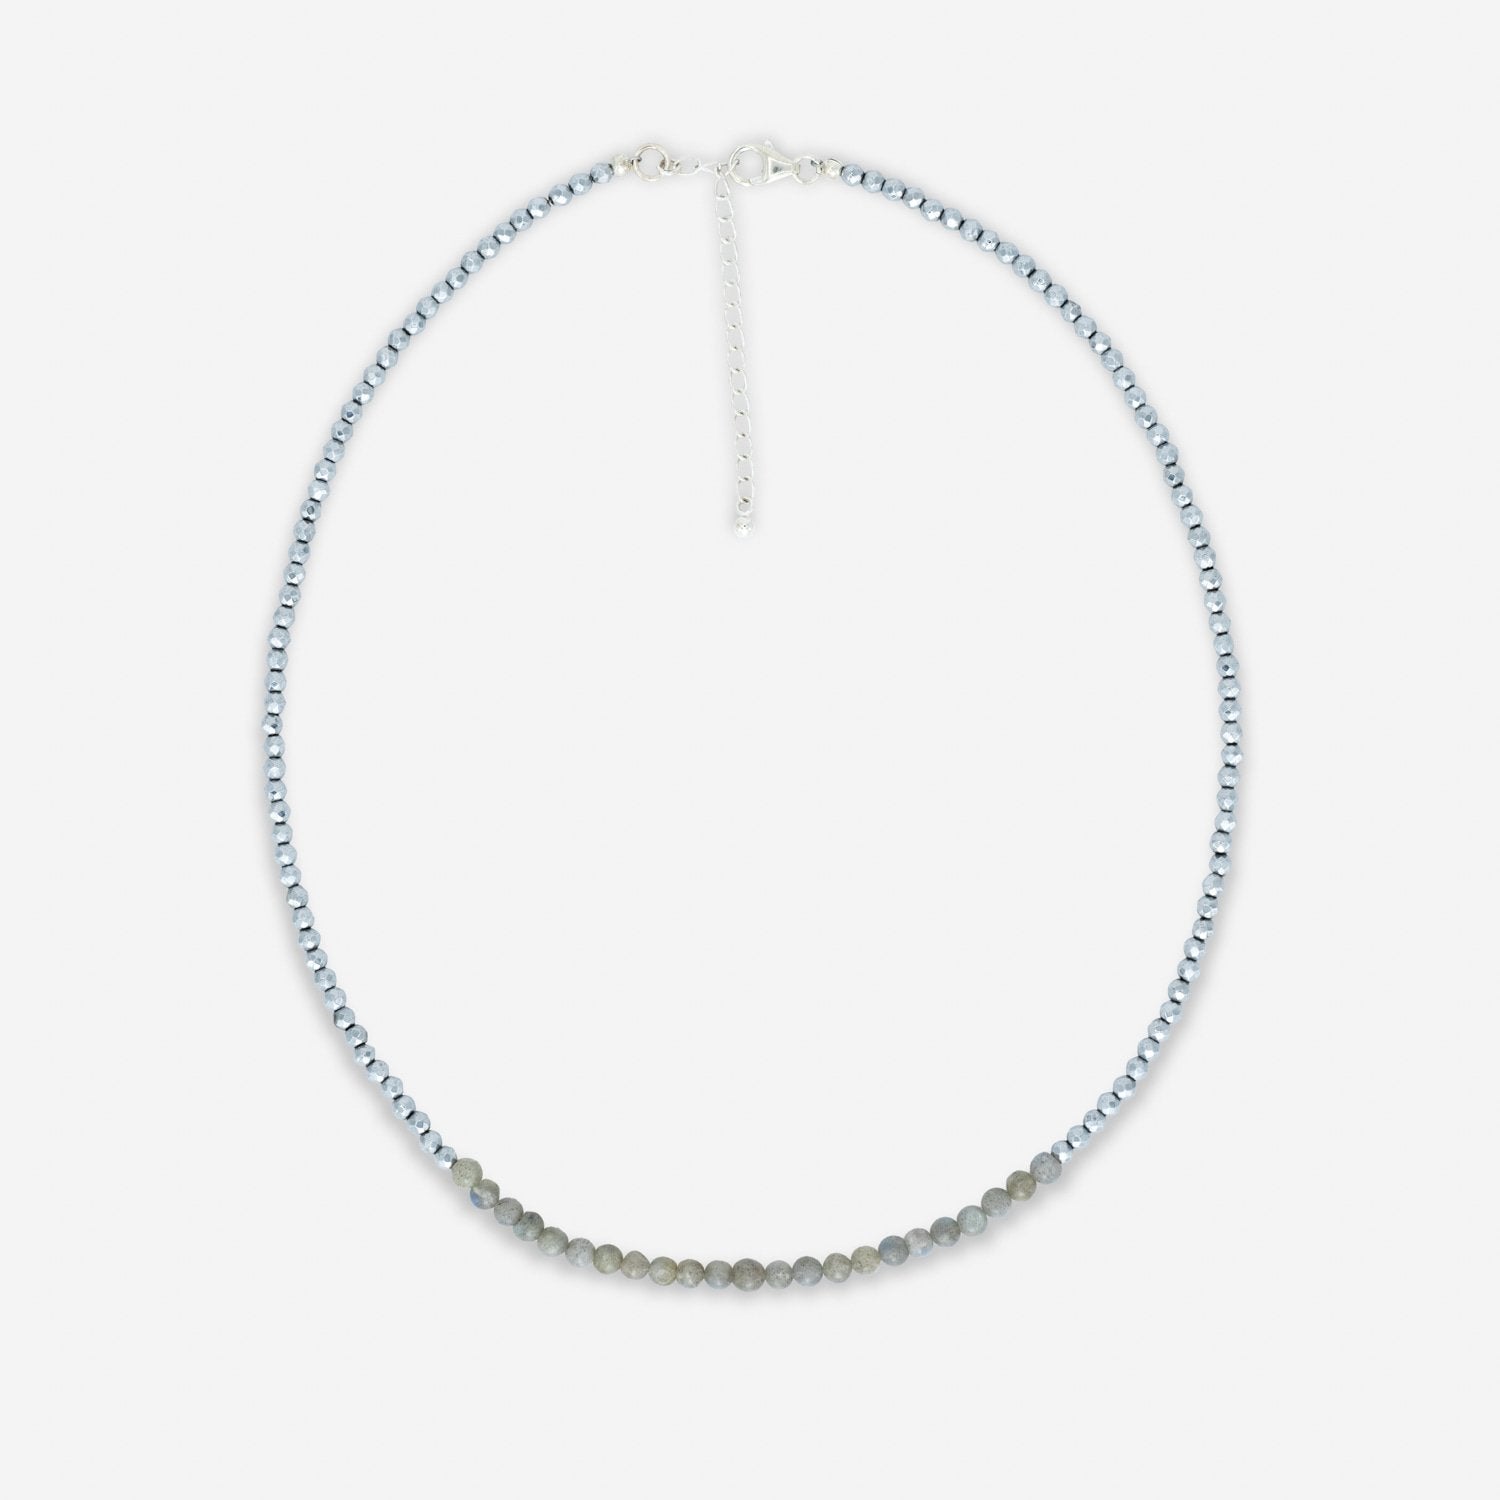 Cocoon Necklace - Orchard Moon